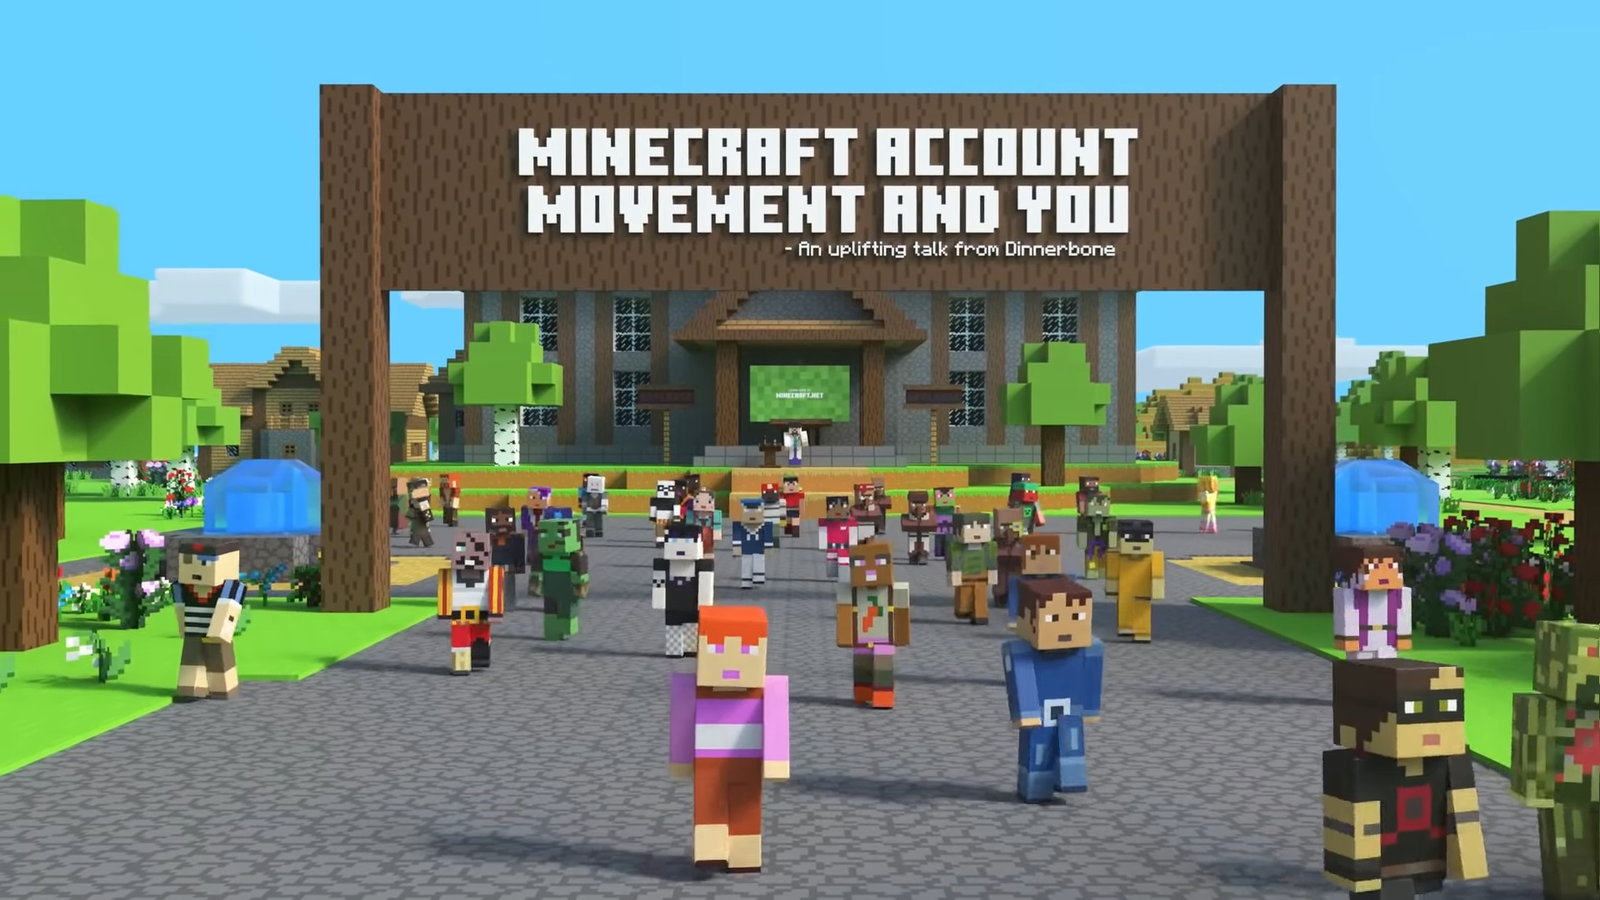 Still can't get free minecraft bedrock with Java linked to account -  Microsoft Community